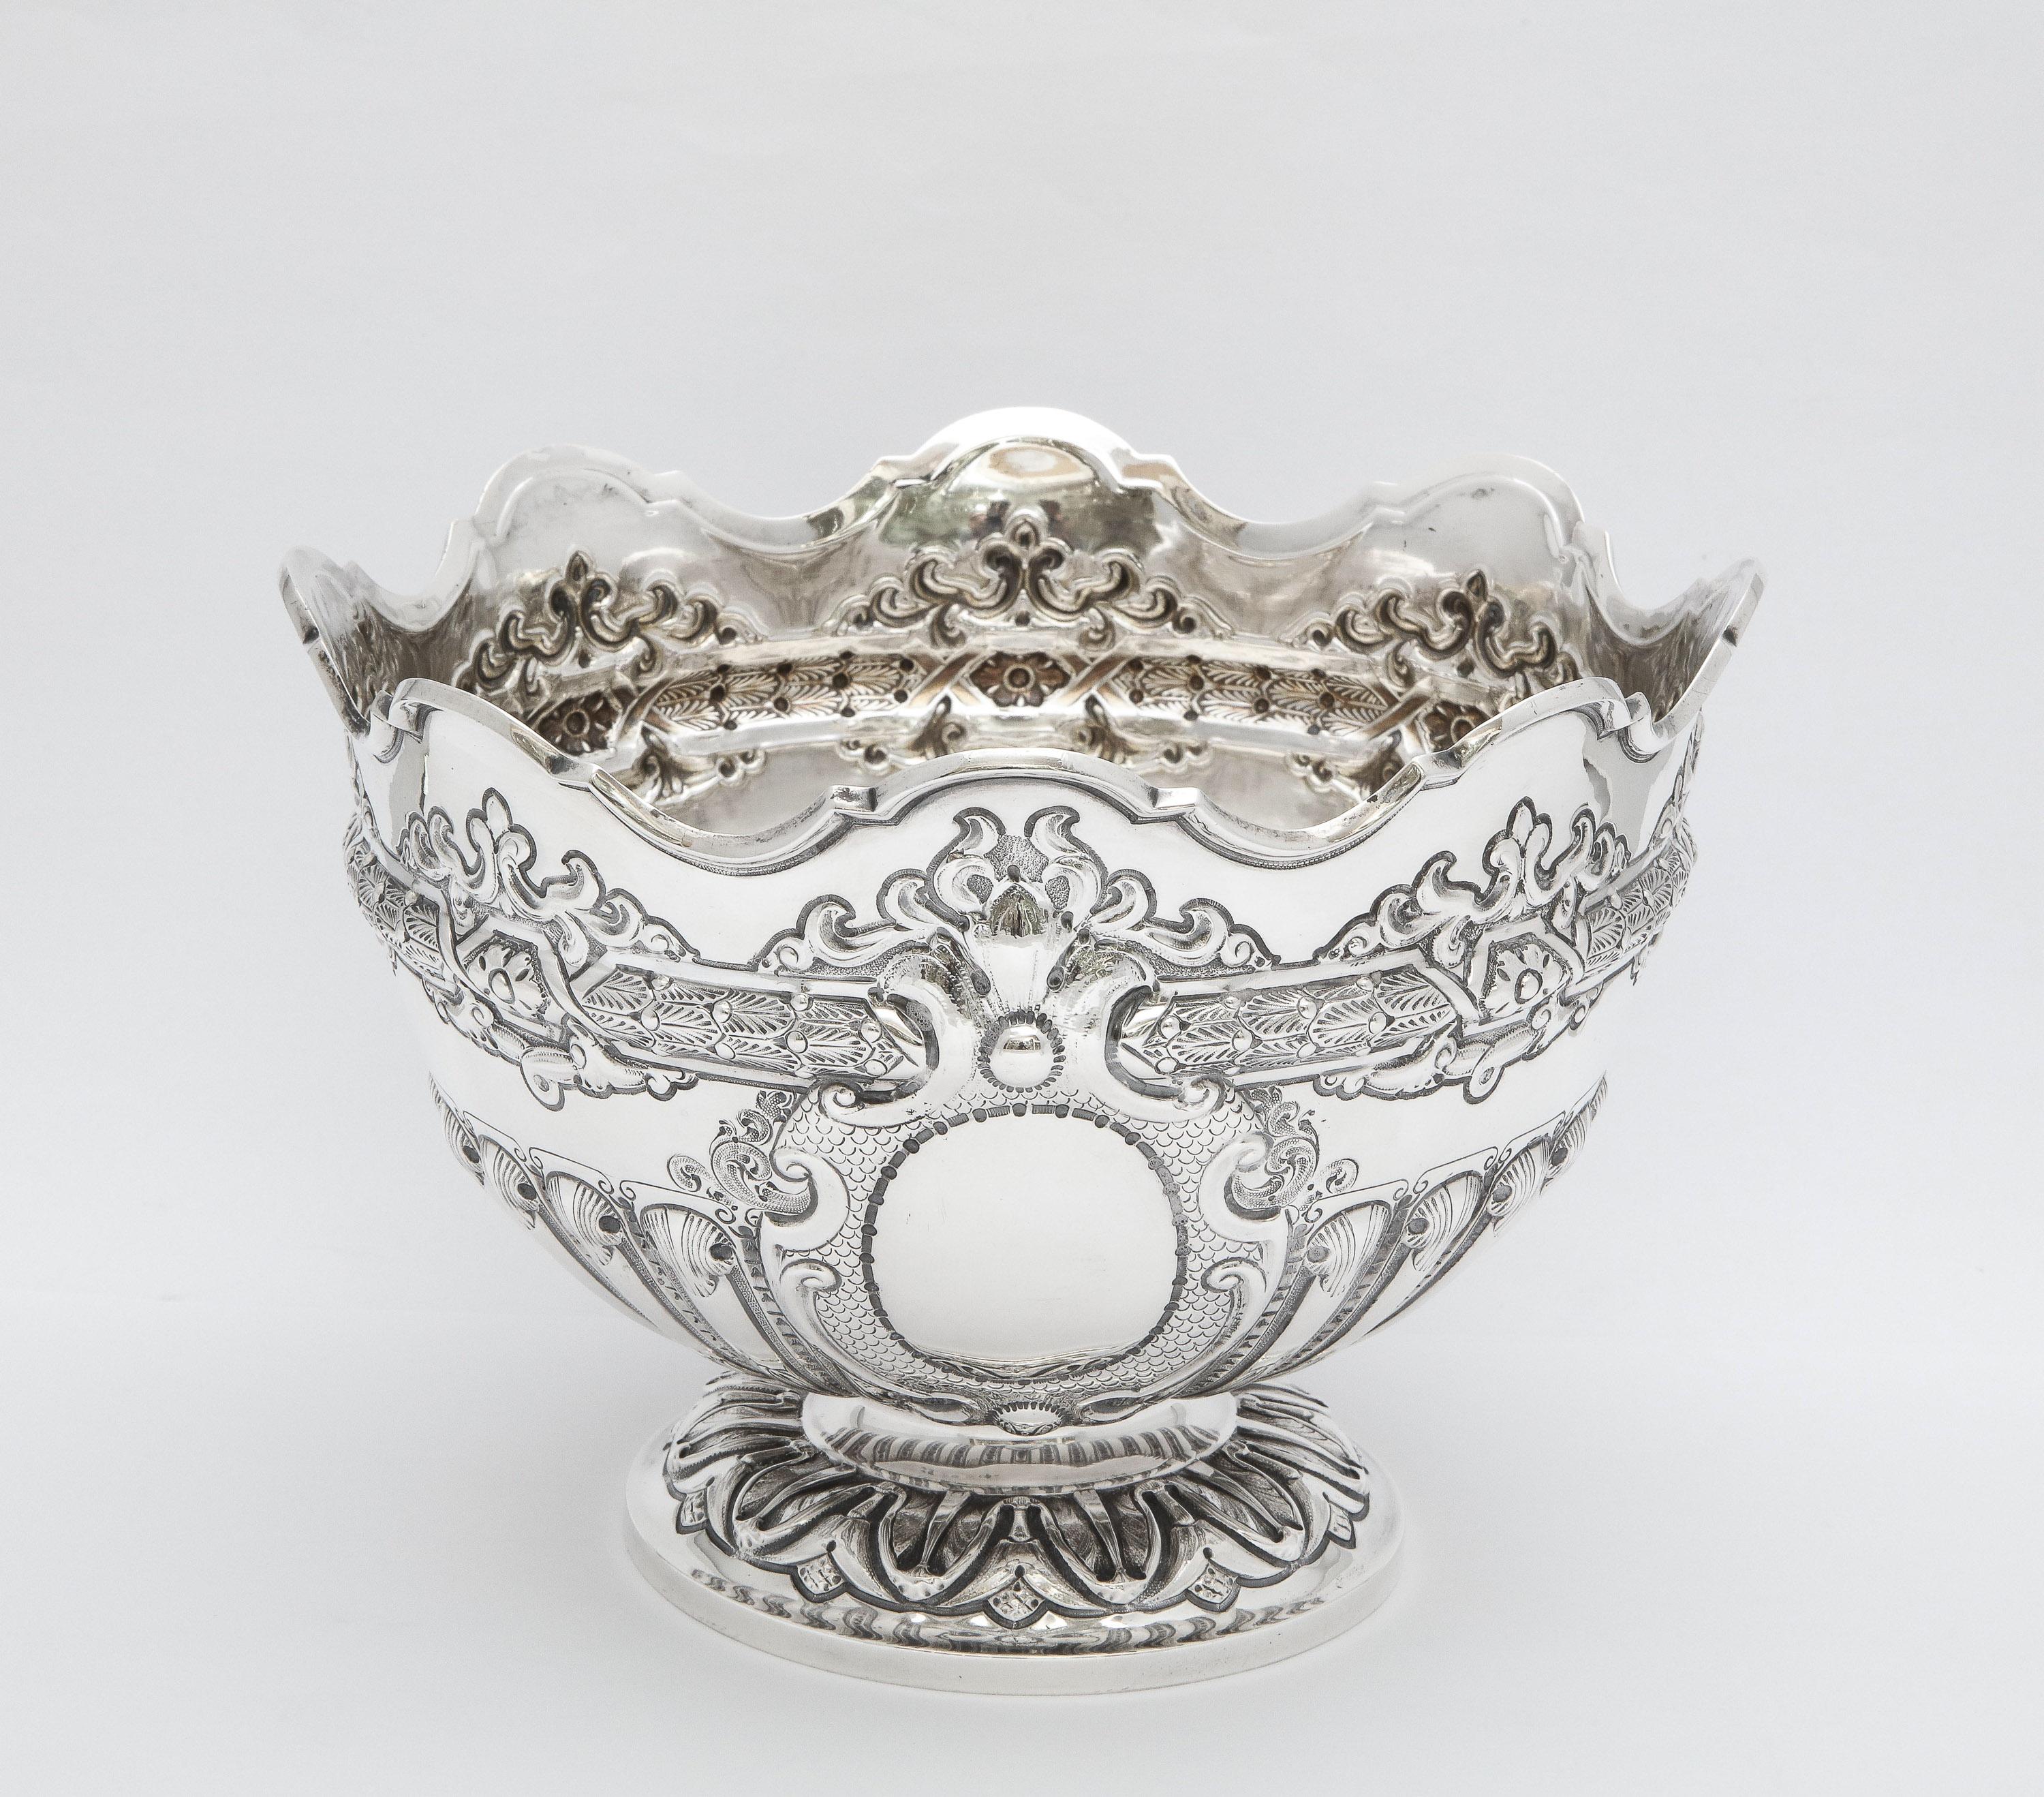 Victorian, sterling silver, pedestal-based Monteith/centerpiece bowl, London, year-hallmarked for 1898, Joseph Hicks - maker. Measures 6 inches high x 8 1/4 inches diameter. Weighs 19.830 troy ounces. Vacant cartouche. Lovely decoration. Dark areas